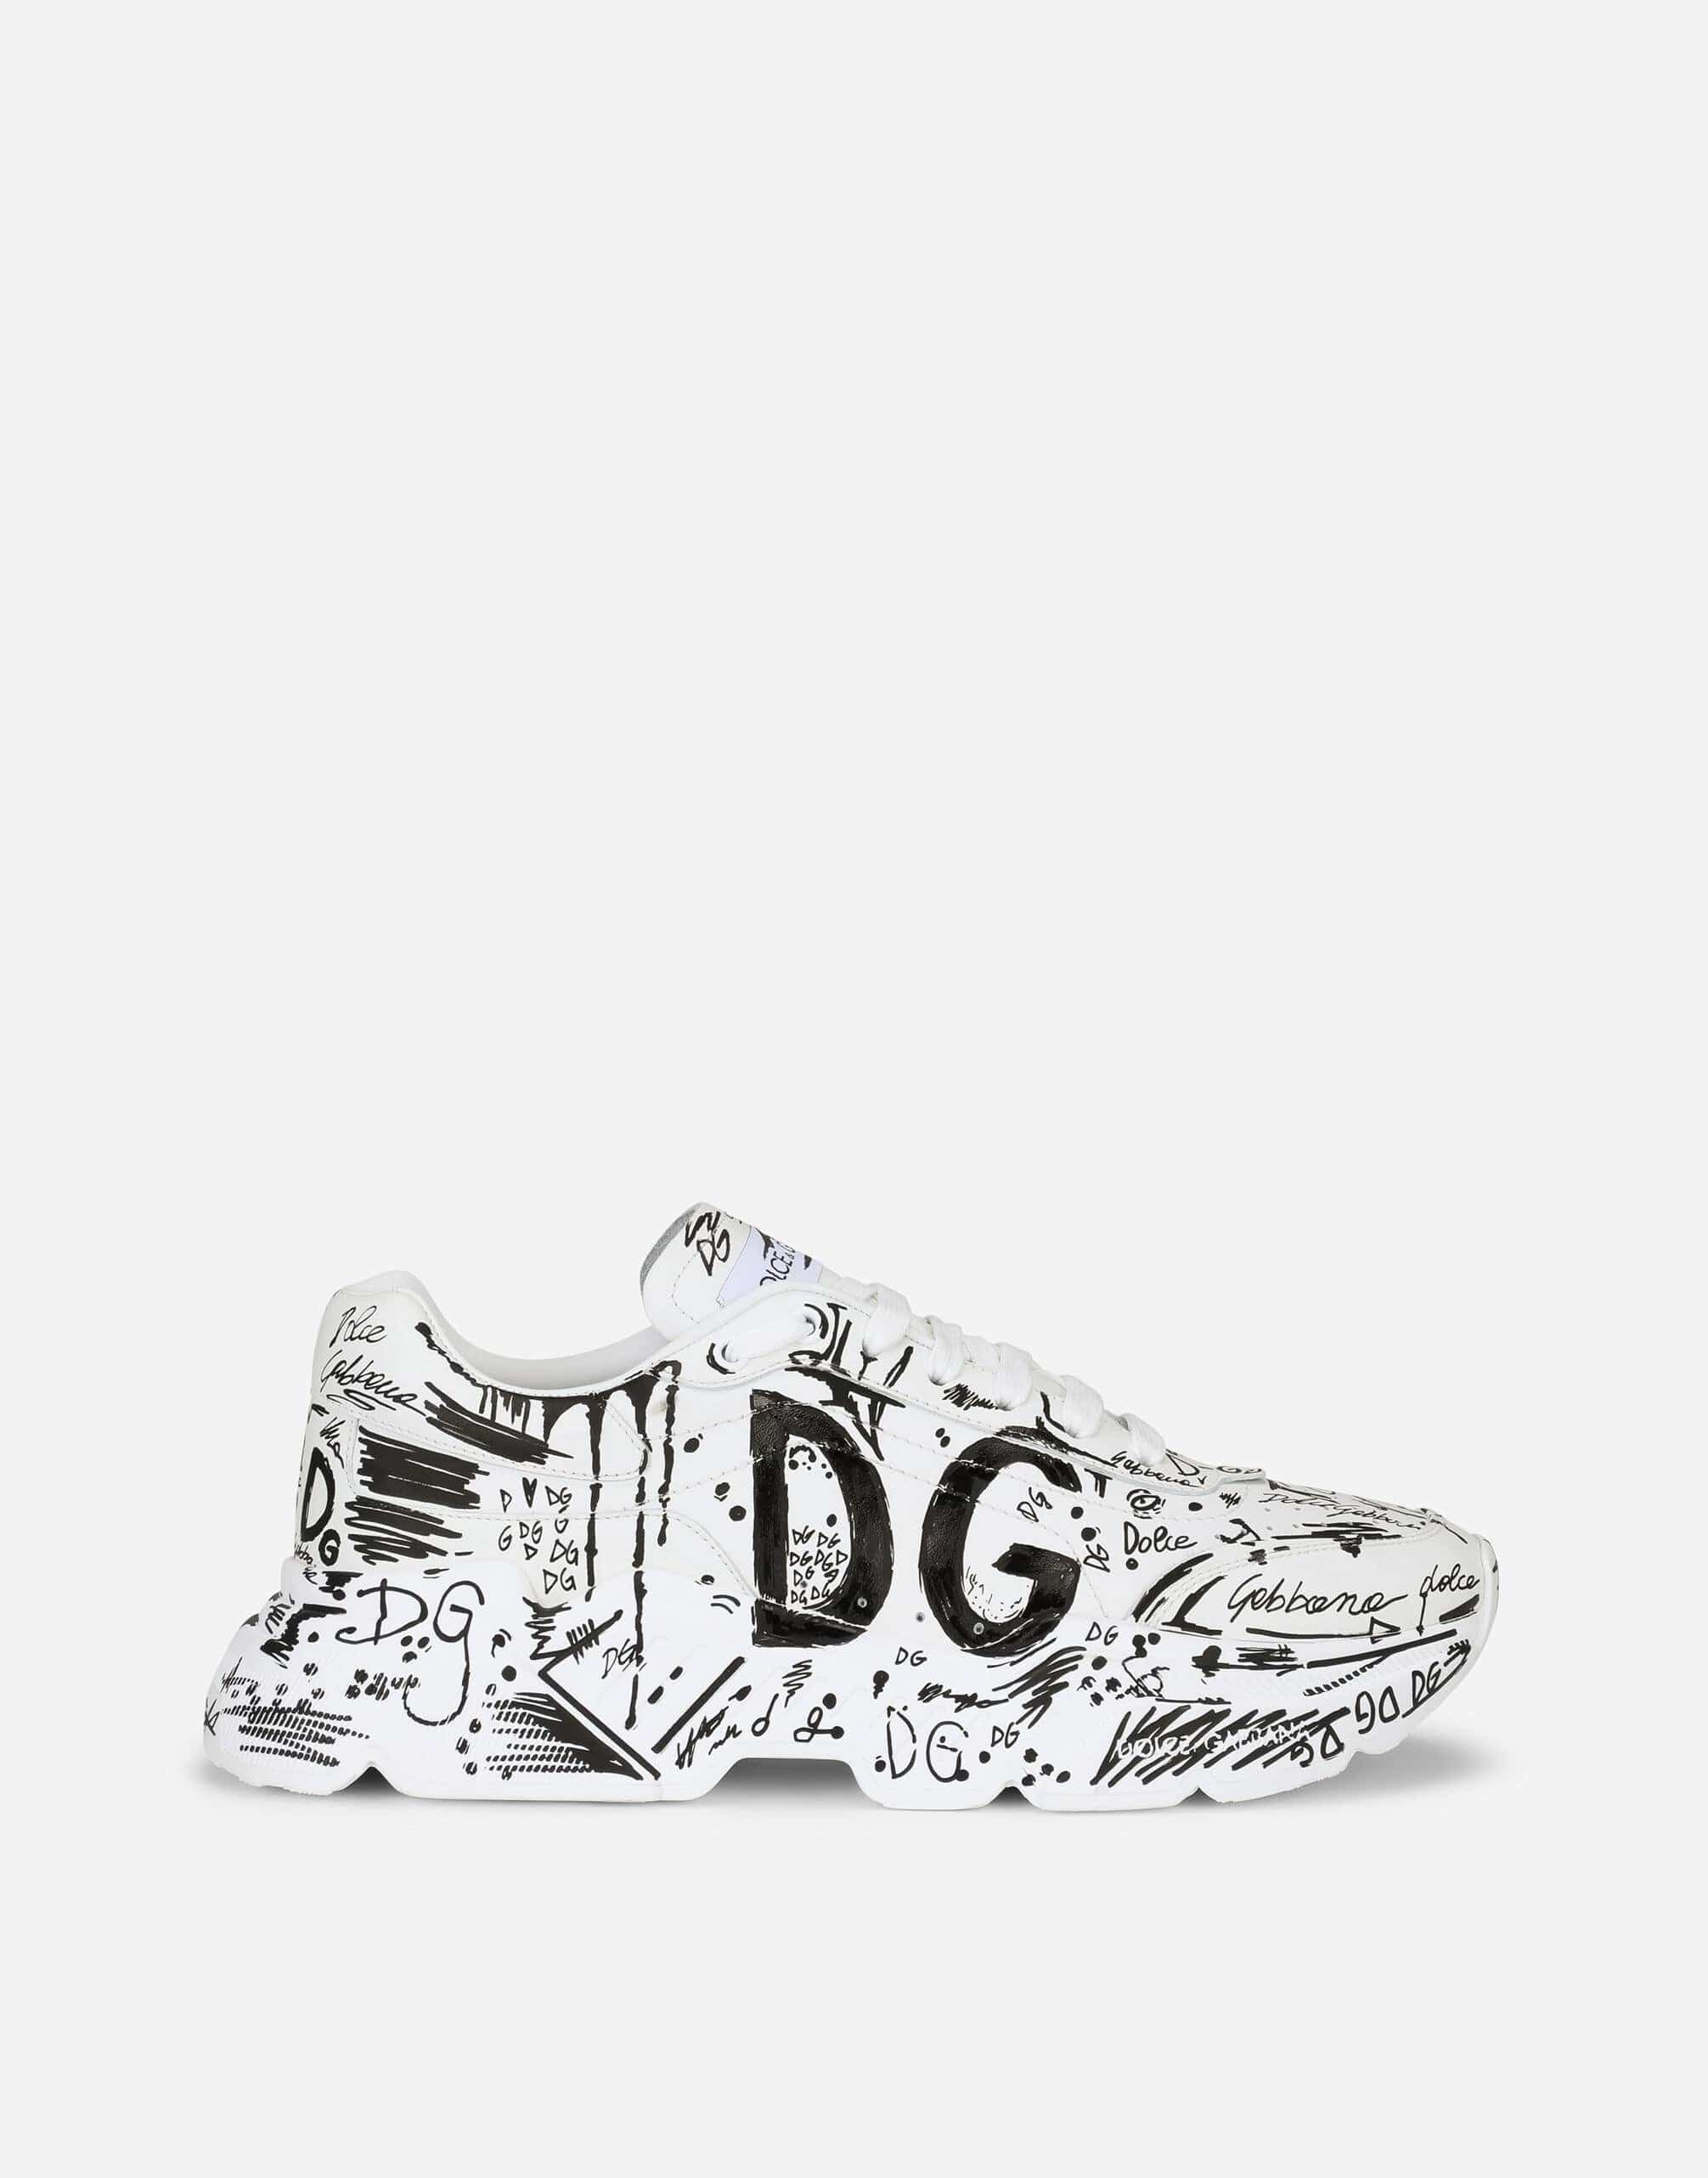 Dolce & Gabbana Hand-painted Graffiti Daymaster Sneakers